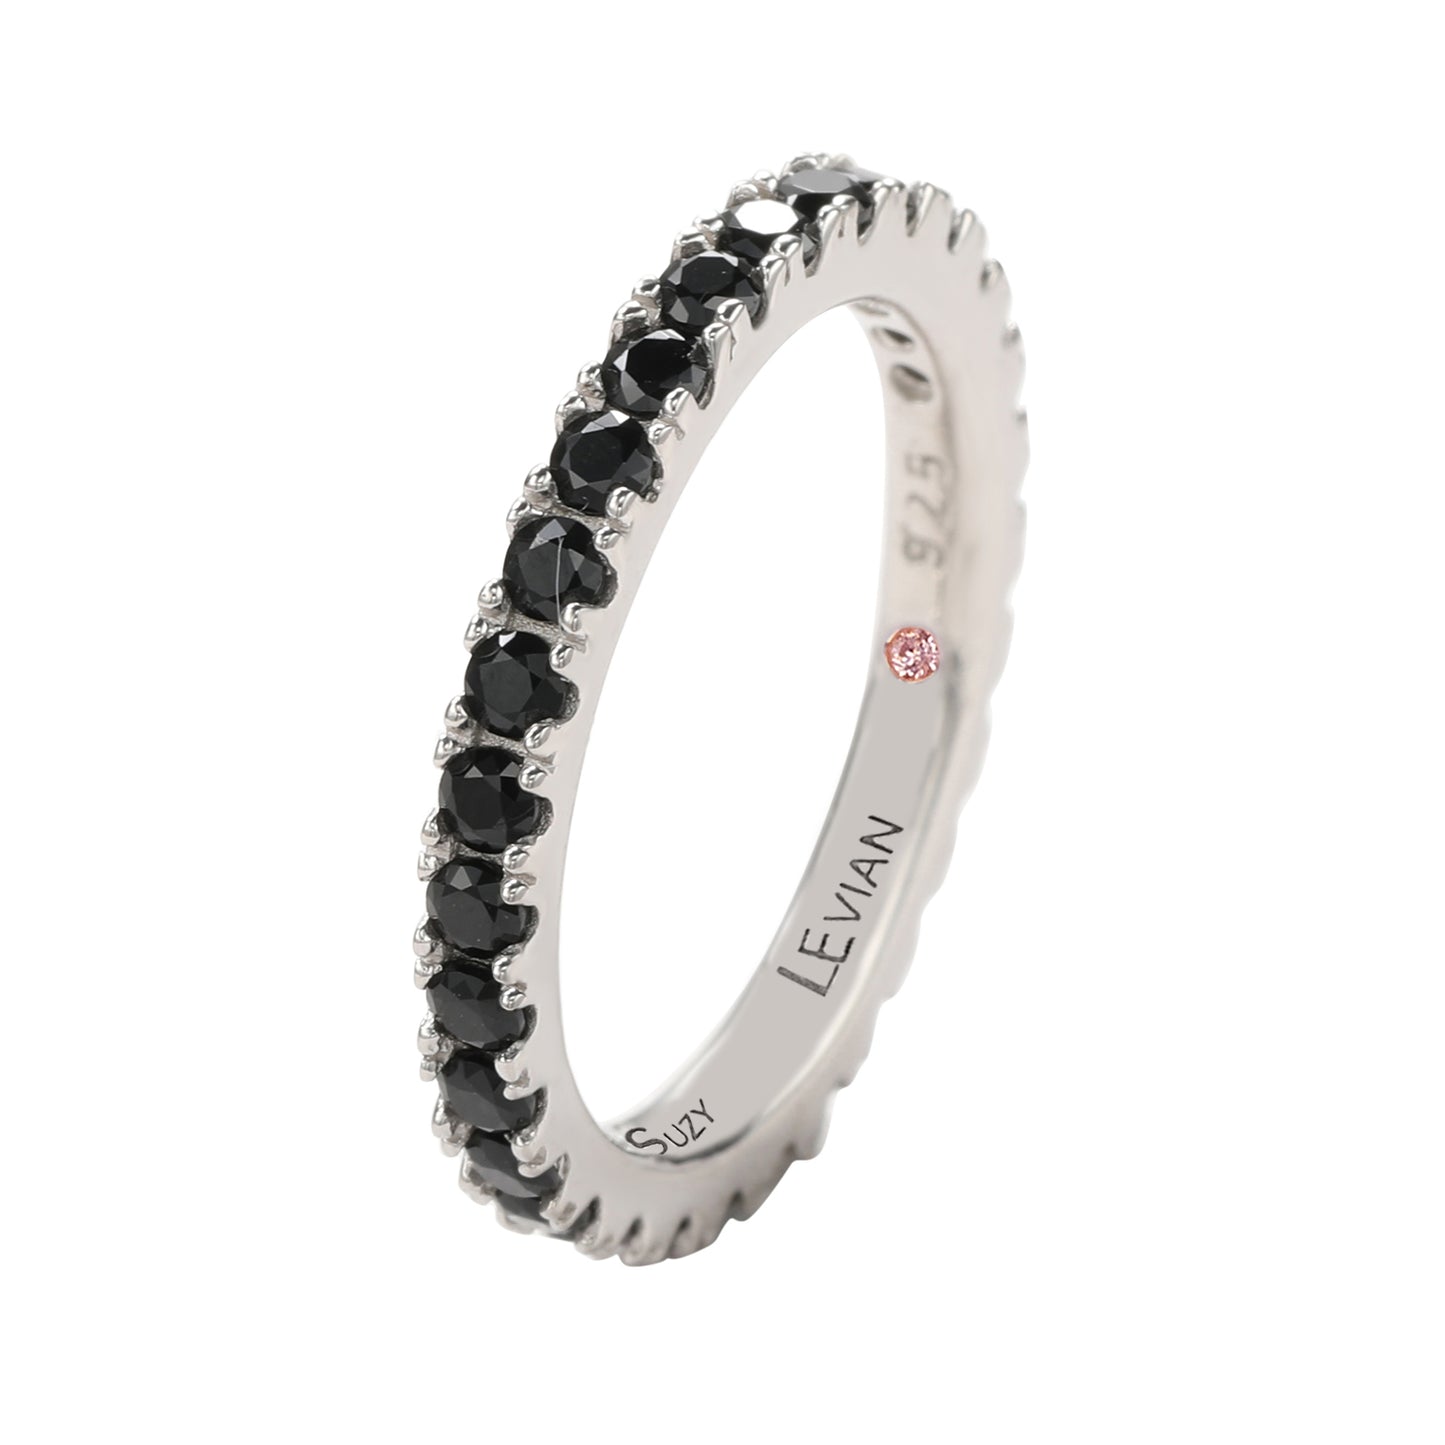 Suzy Levian Sterling Silver Thin Black Cubic Zirconia Eternity Band